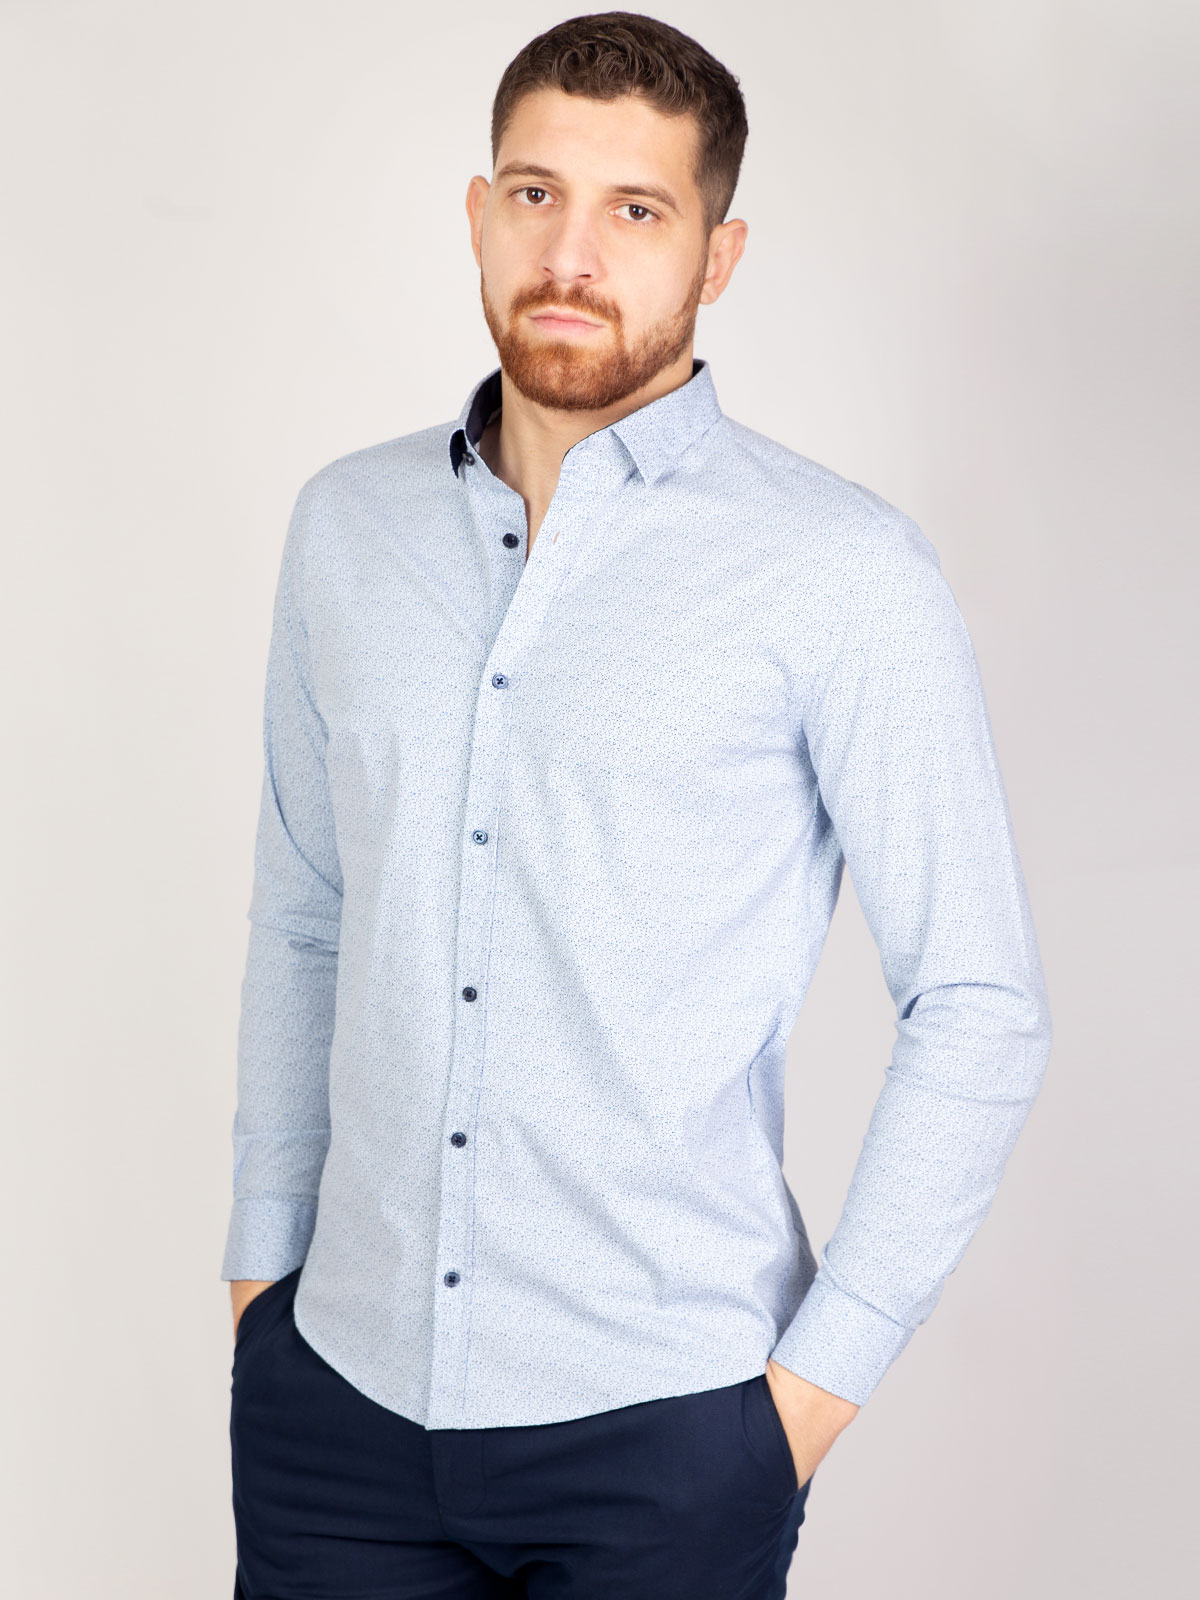 Light blue shirt with small dots - 21483 € 27.00 img3